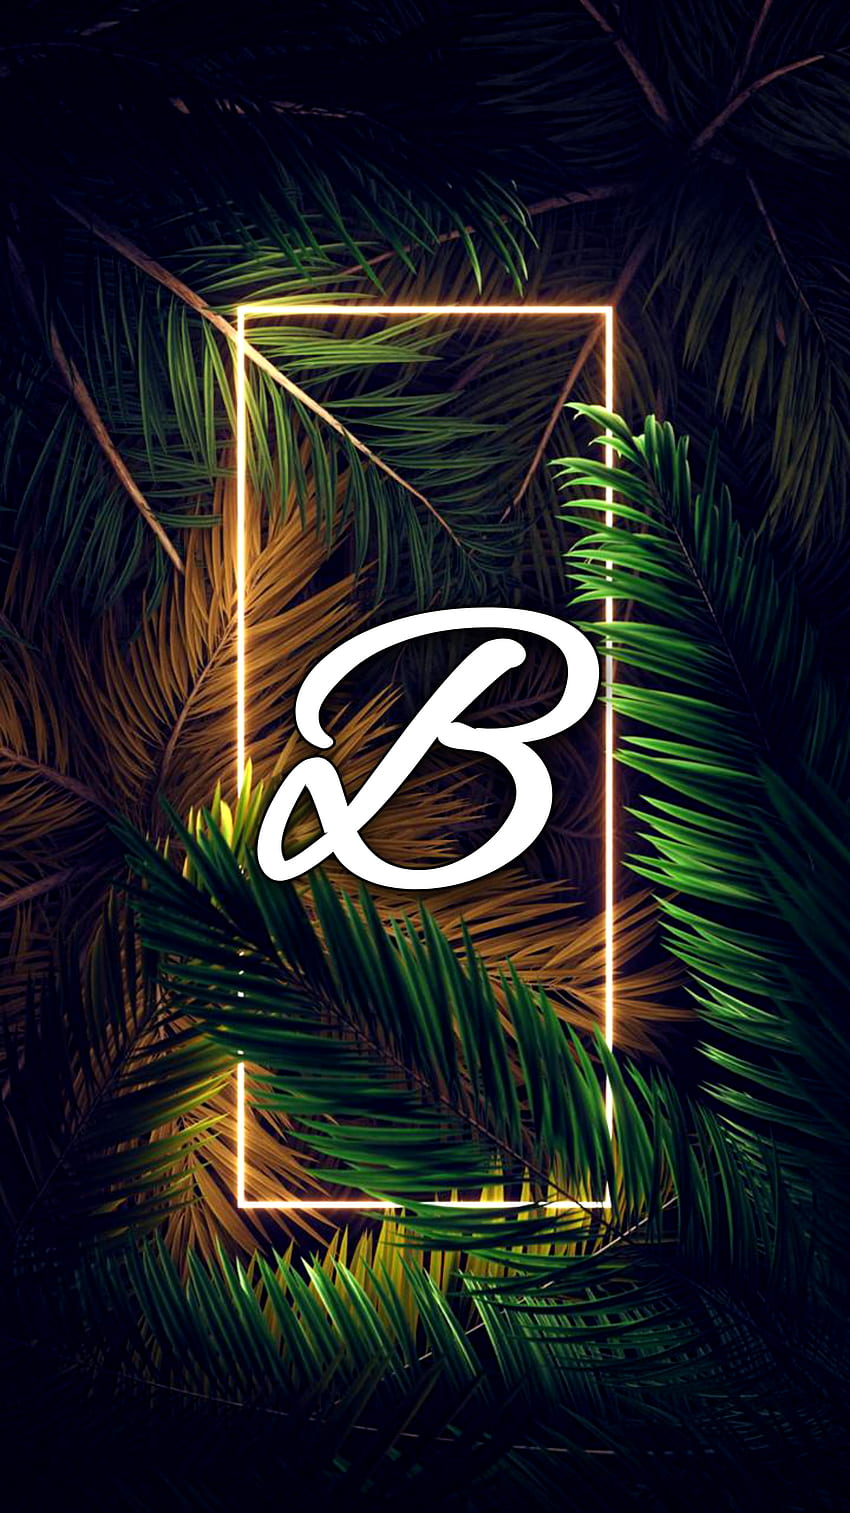 Download b letter wallpaper Free for Android - b letter wallpaper APK  Download - STEPrimo.com